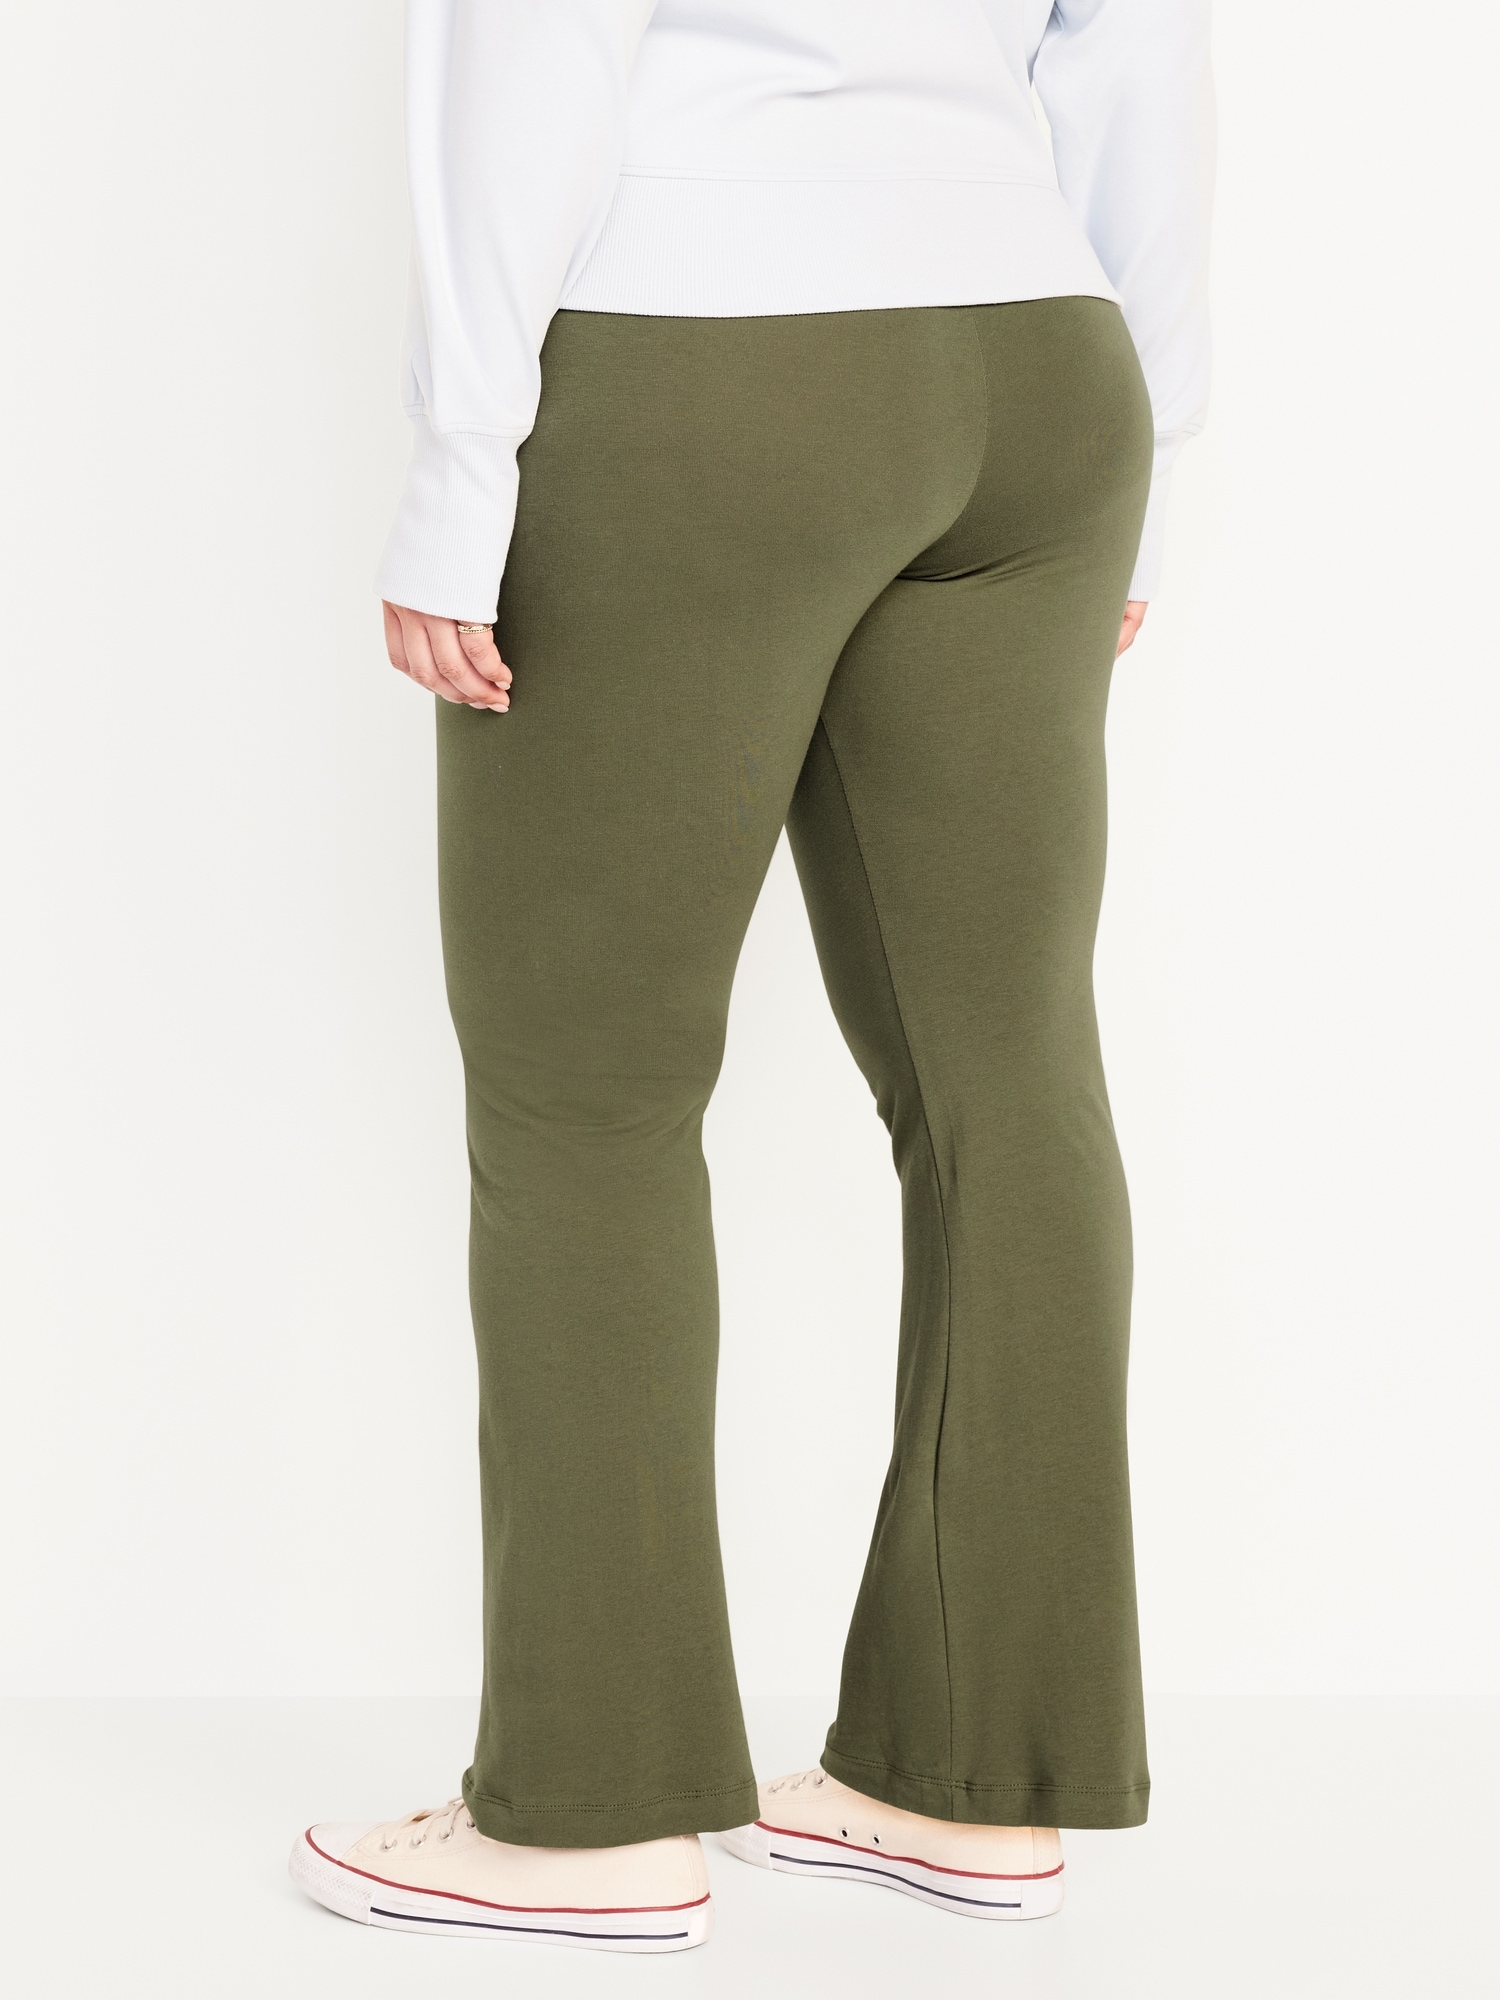 Old Navy Solid Brown Leggings Size M (Petite) - 46% off